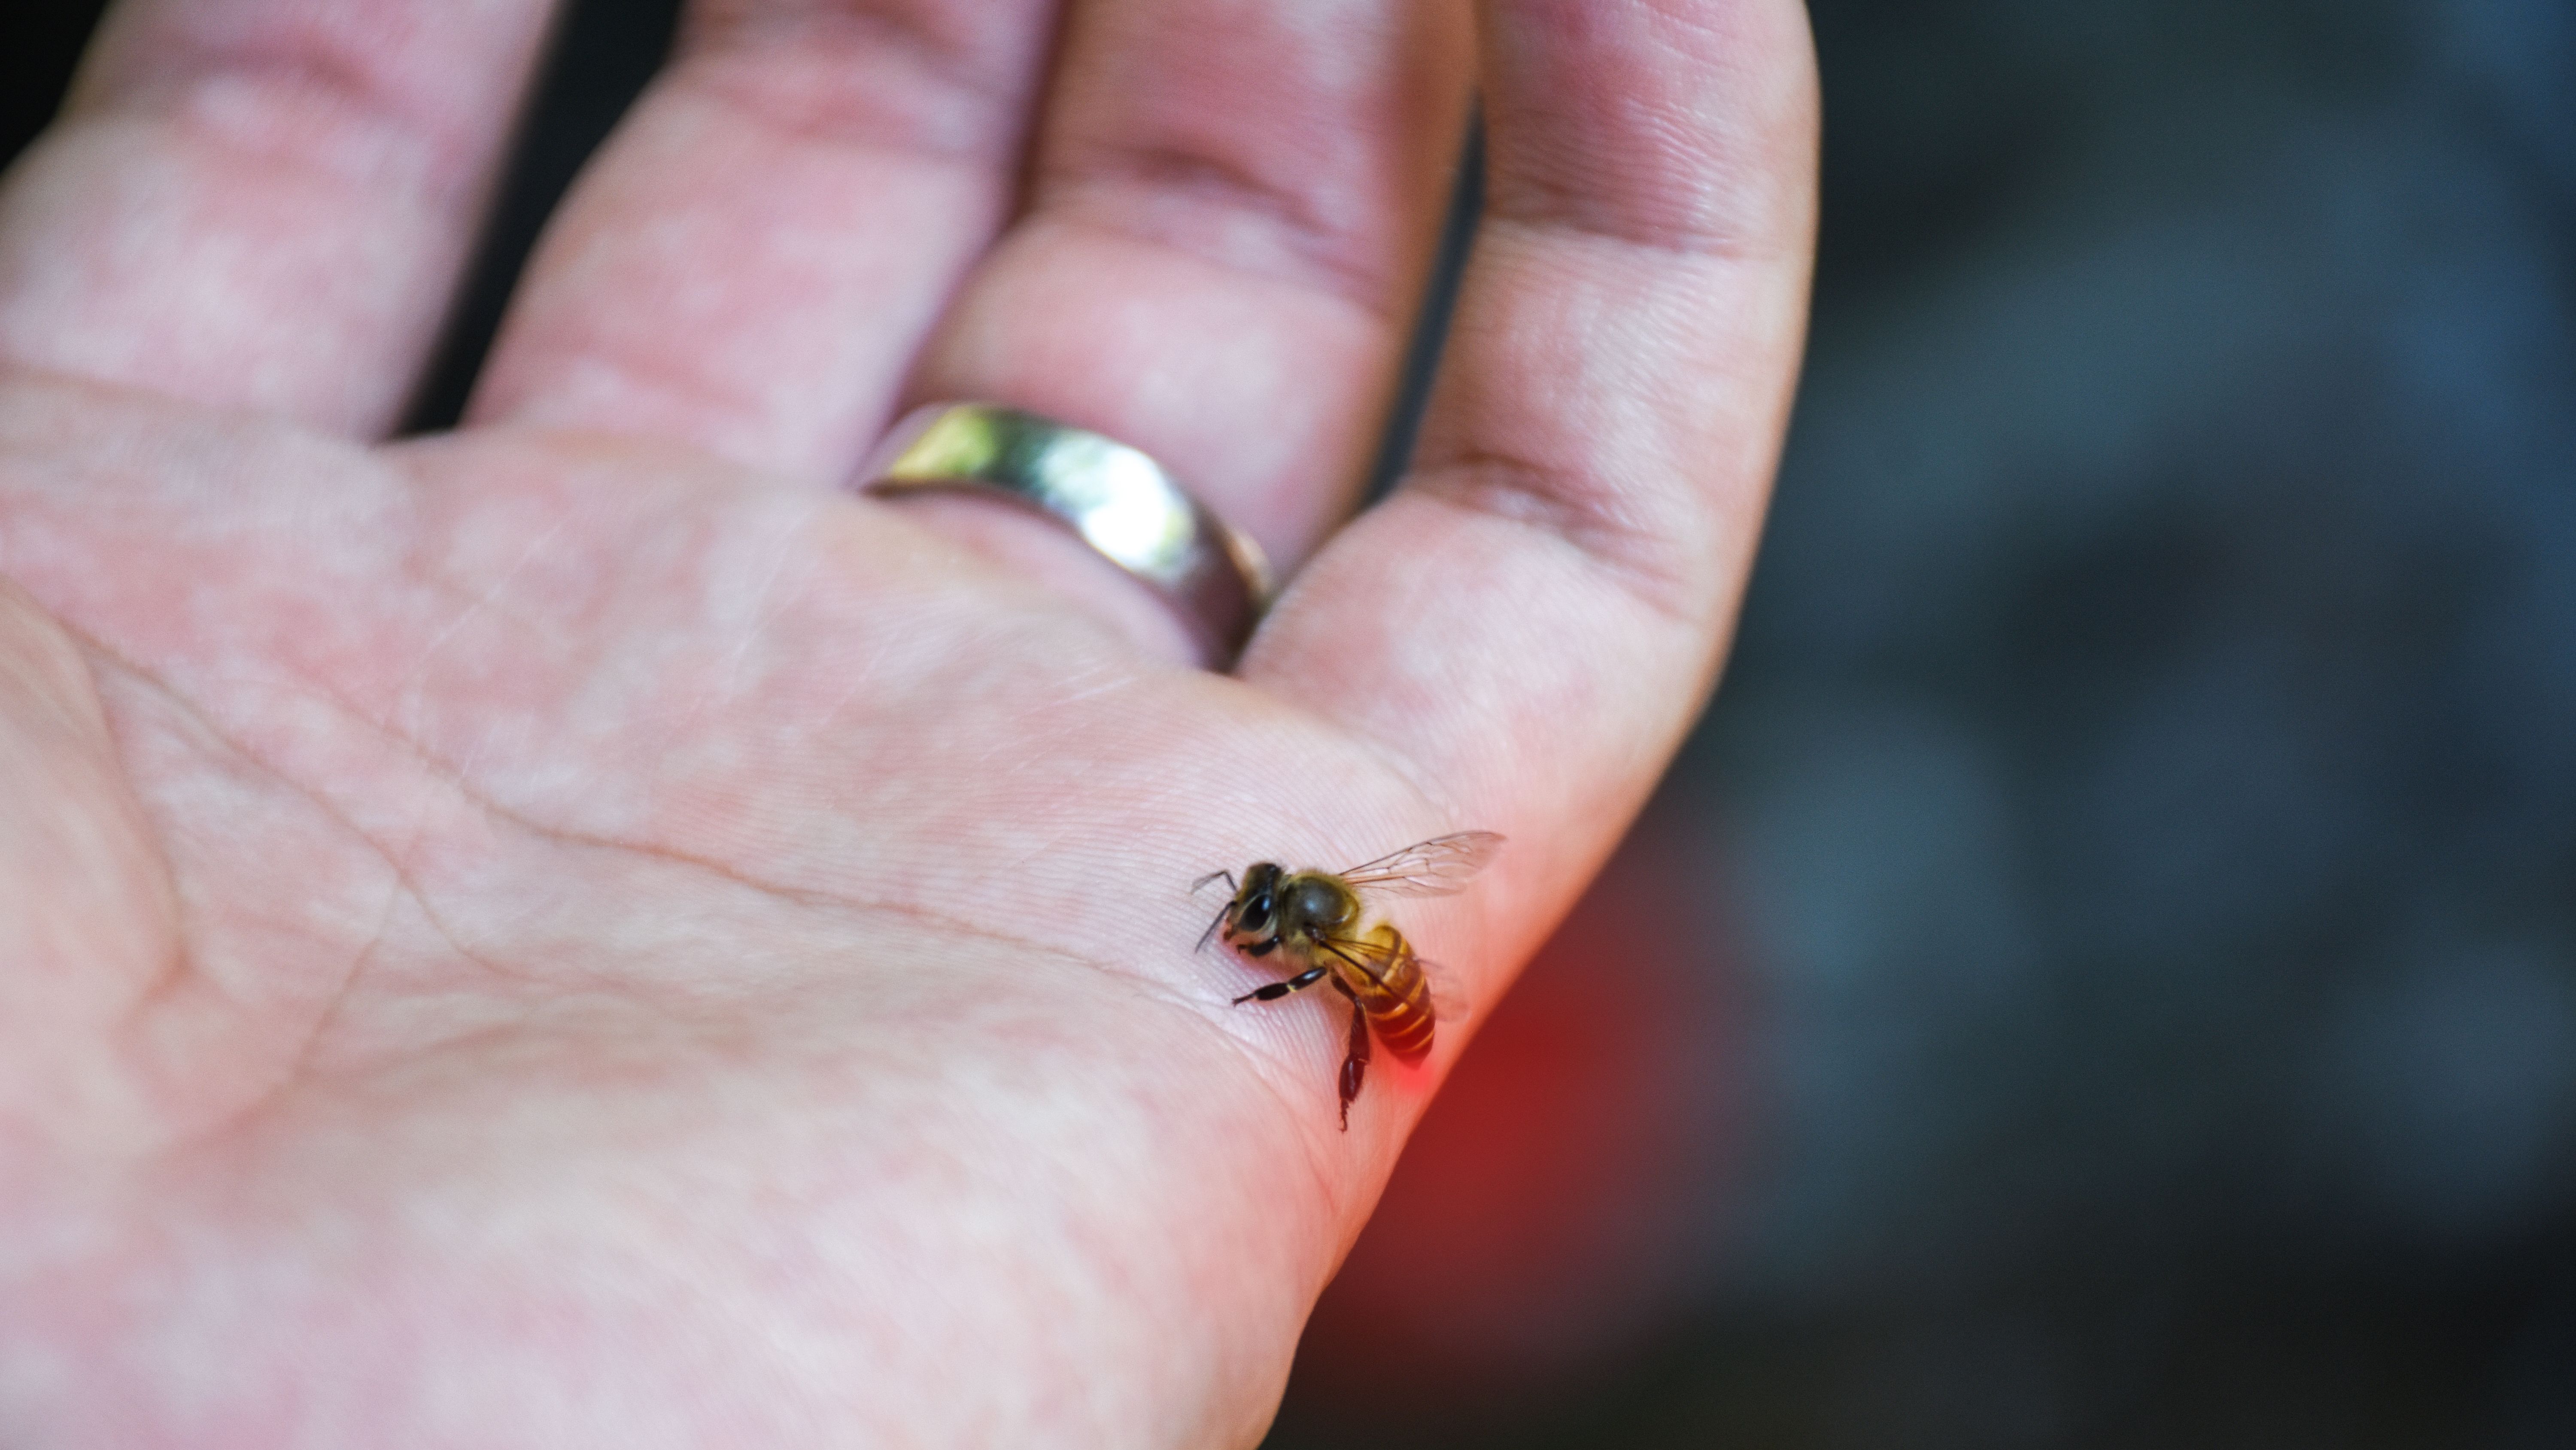 The Most Painful Places to Get Stung, According to the Researcher Who